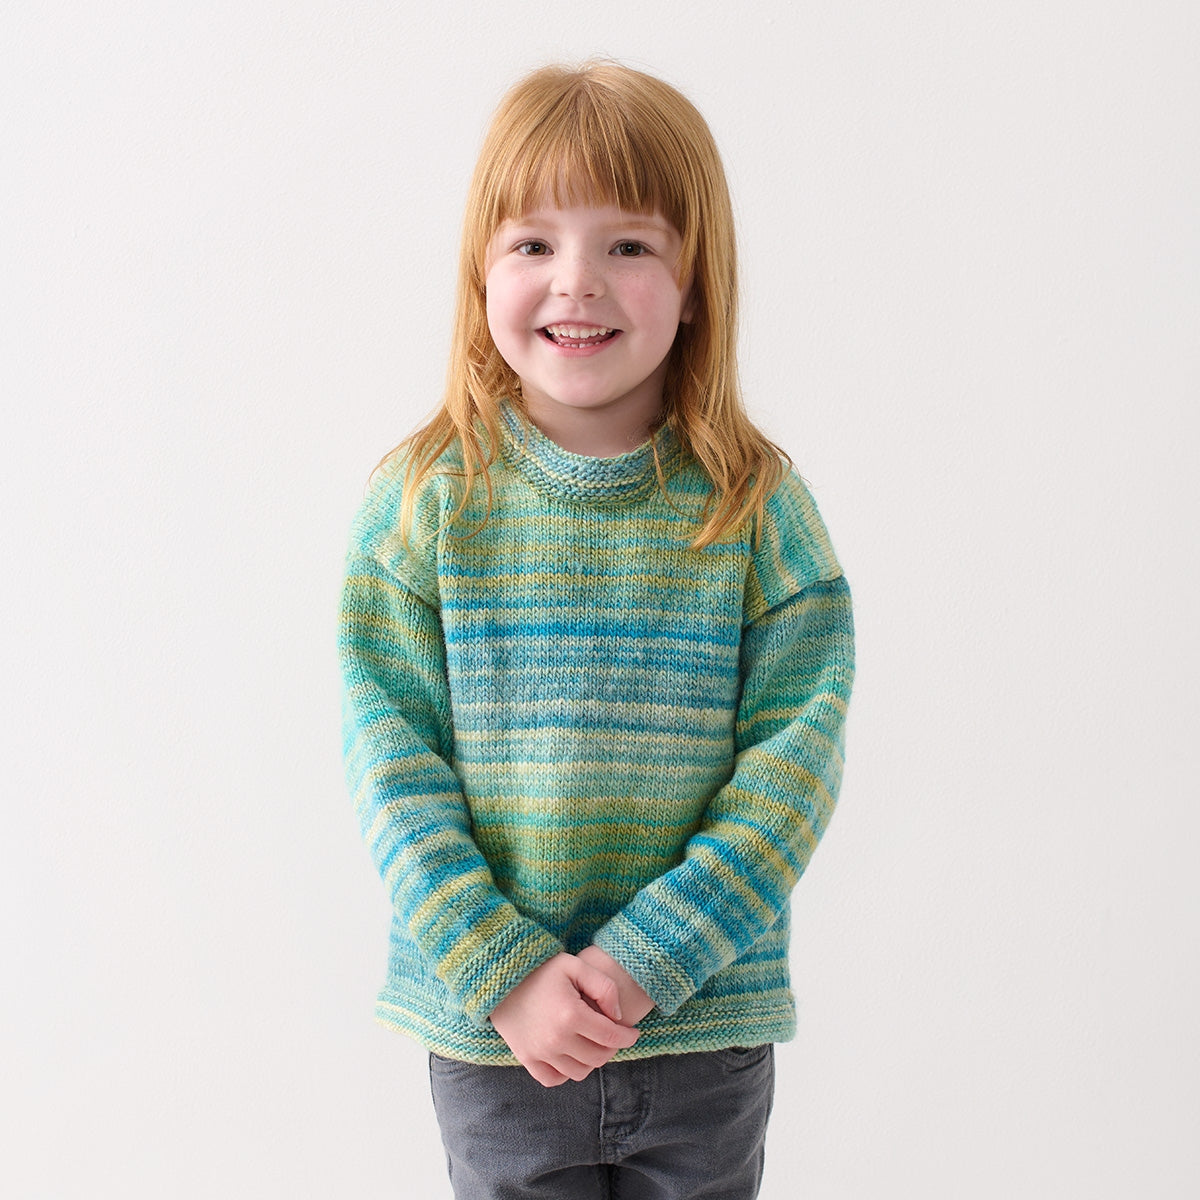 Allsorts Hoodie and Jumper - Patons PDF Pattern